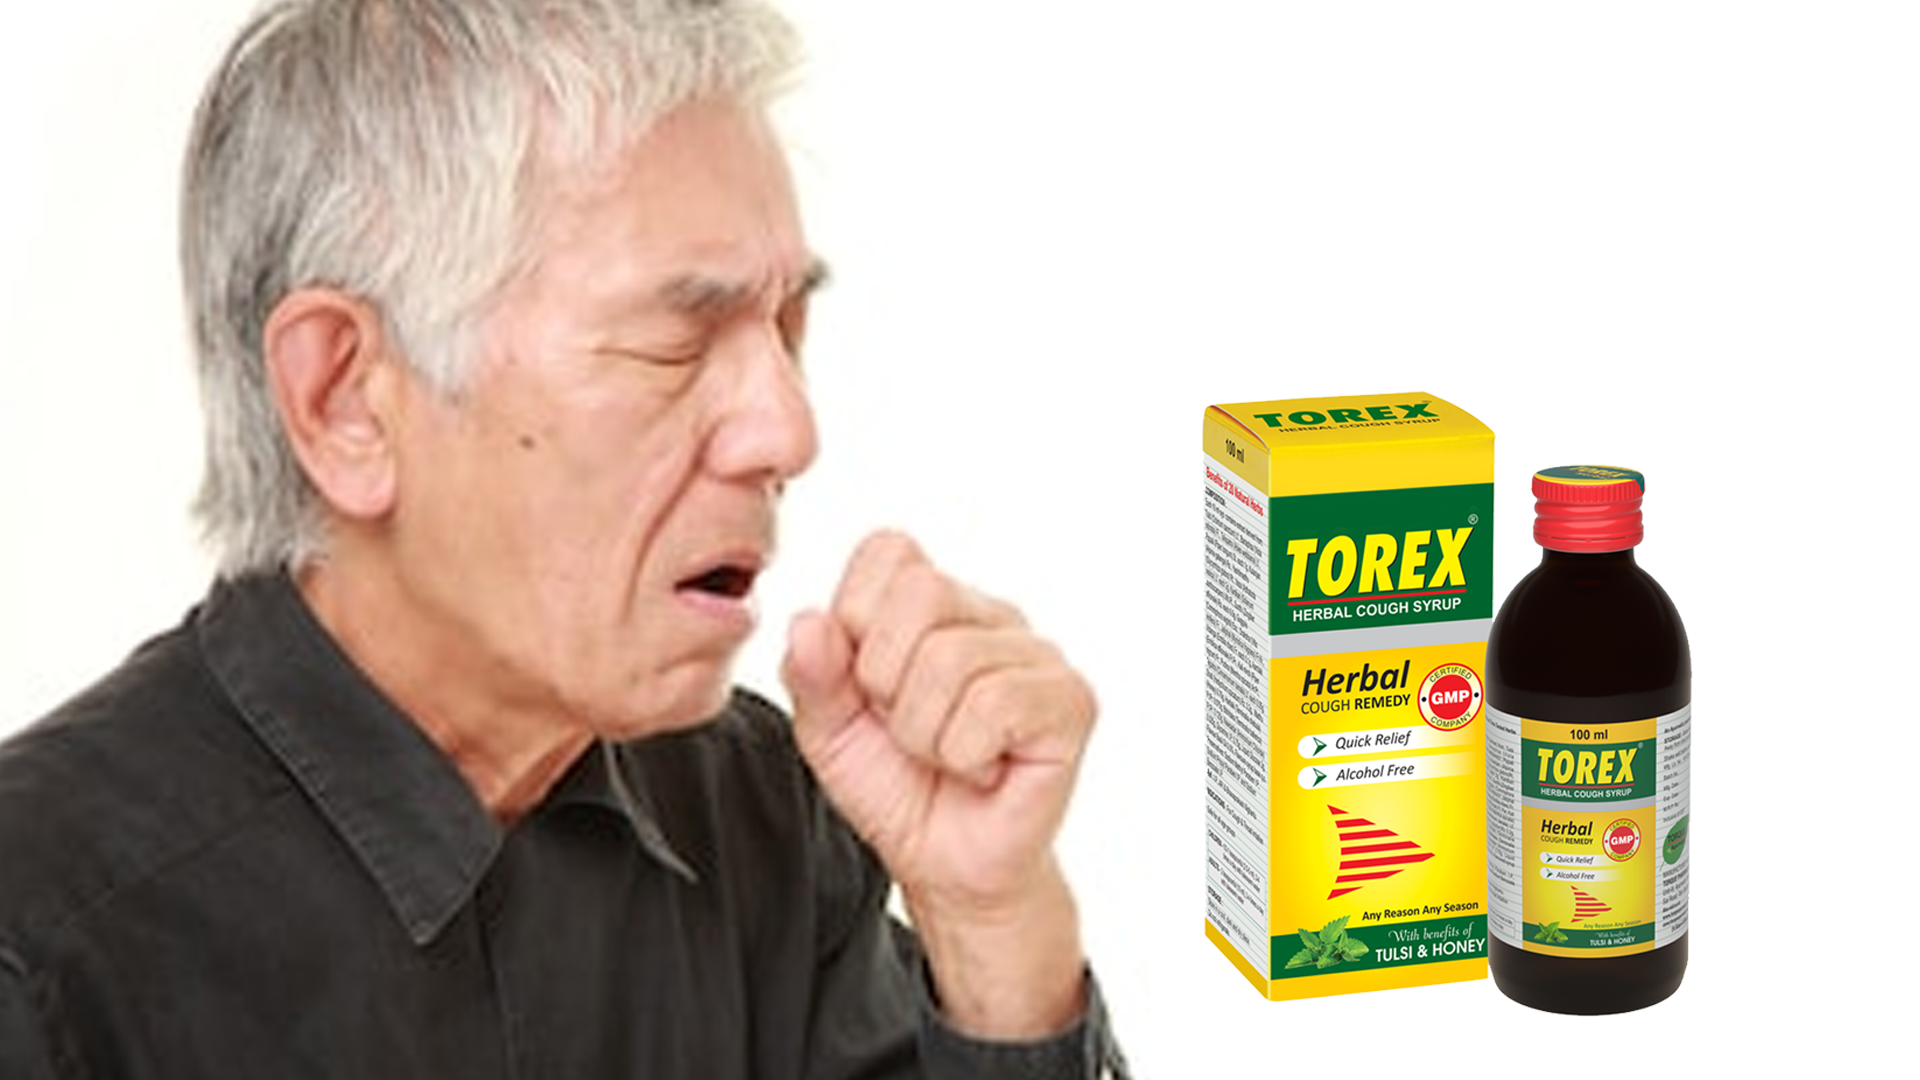 As soon as we suffer from this disorder a natural reaction would be to reach out to a torex cough syrup manufacturer. They are going to provide a quick fix to the problem of cough.